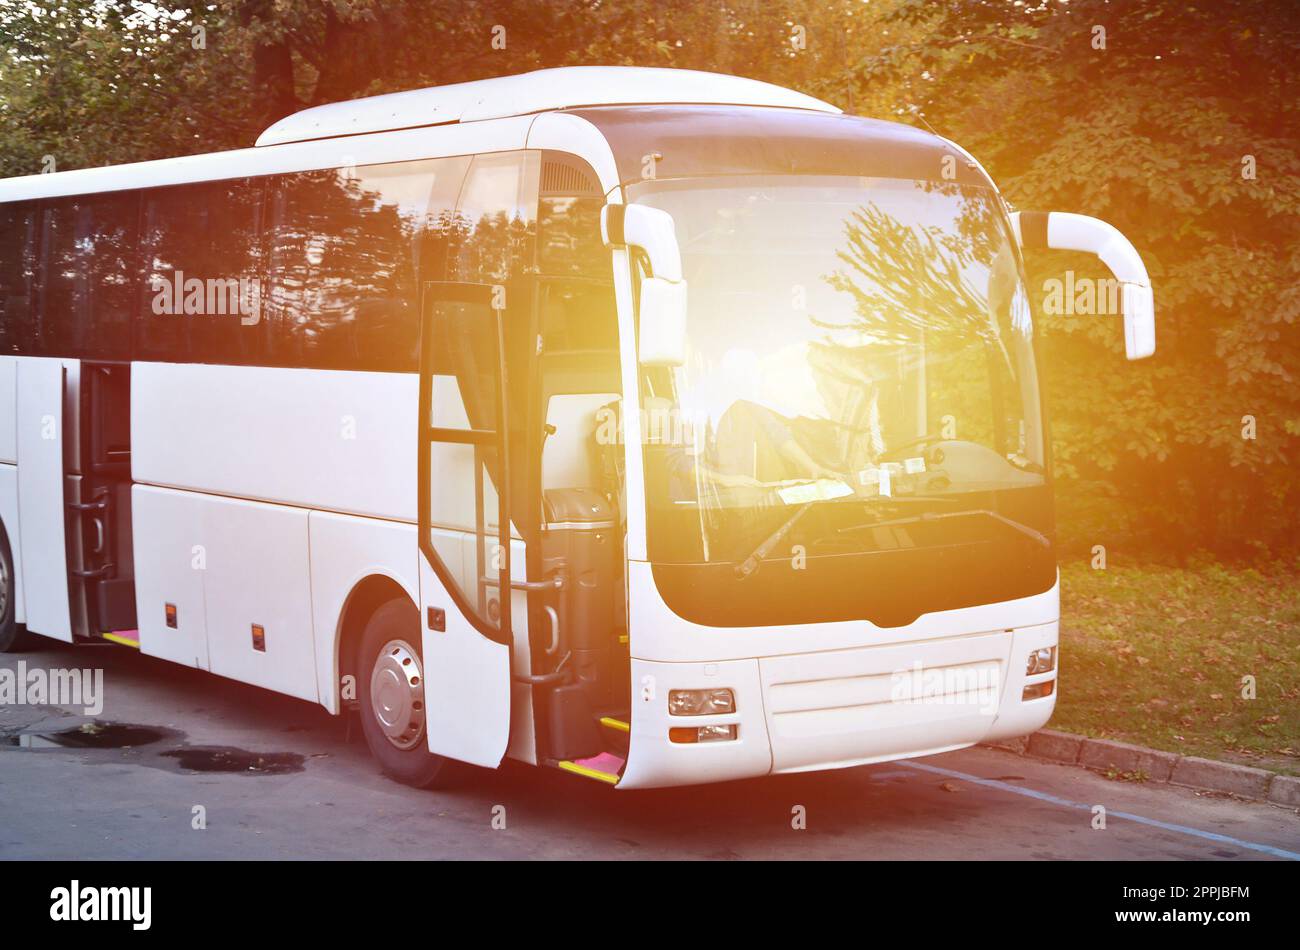 White tourist bus for excursions. The bus is parked in a parking lot near the park Stock Photo